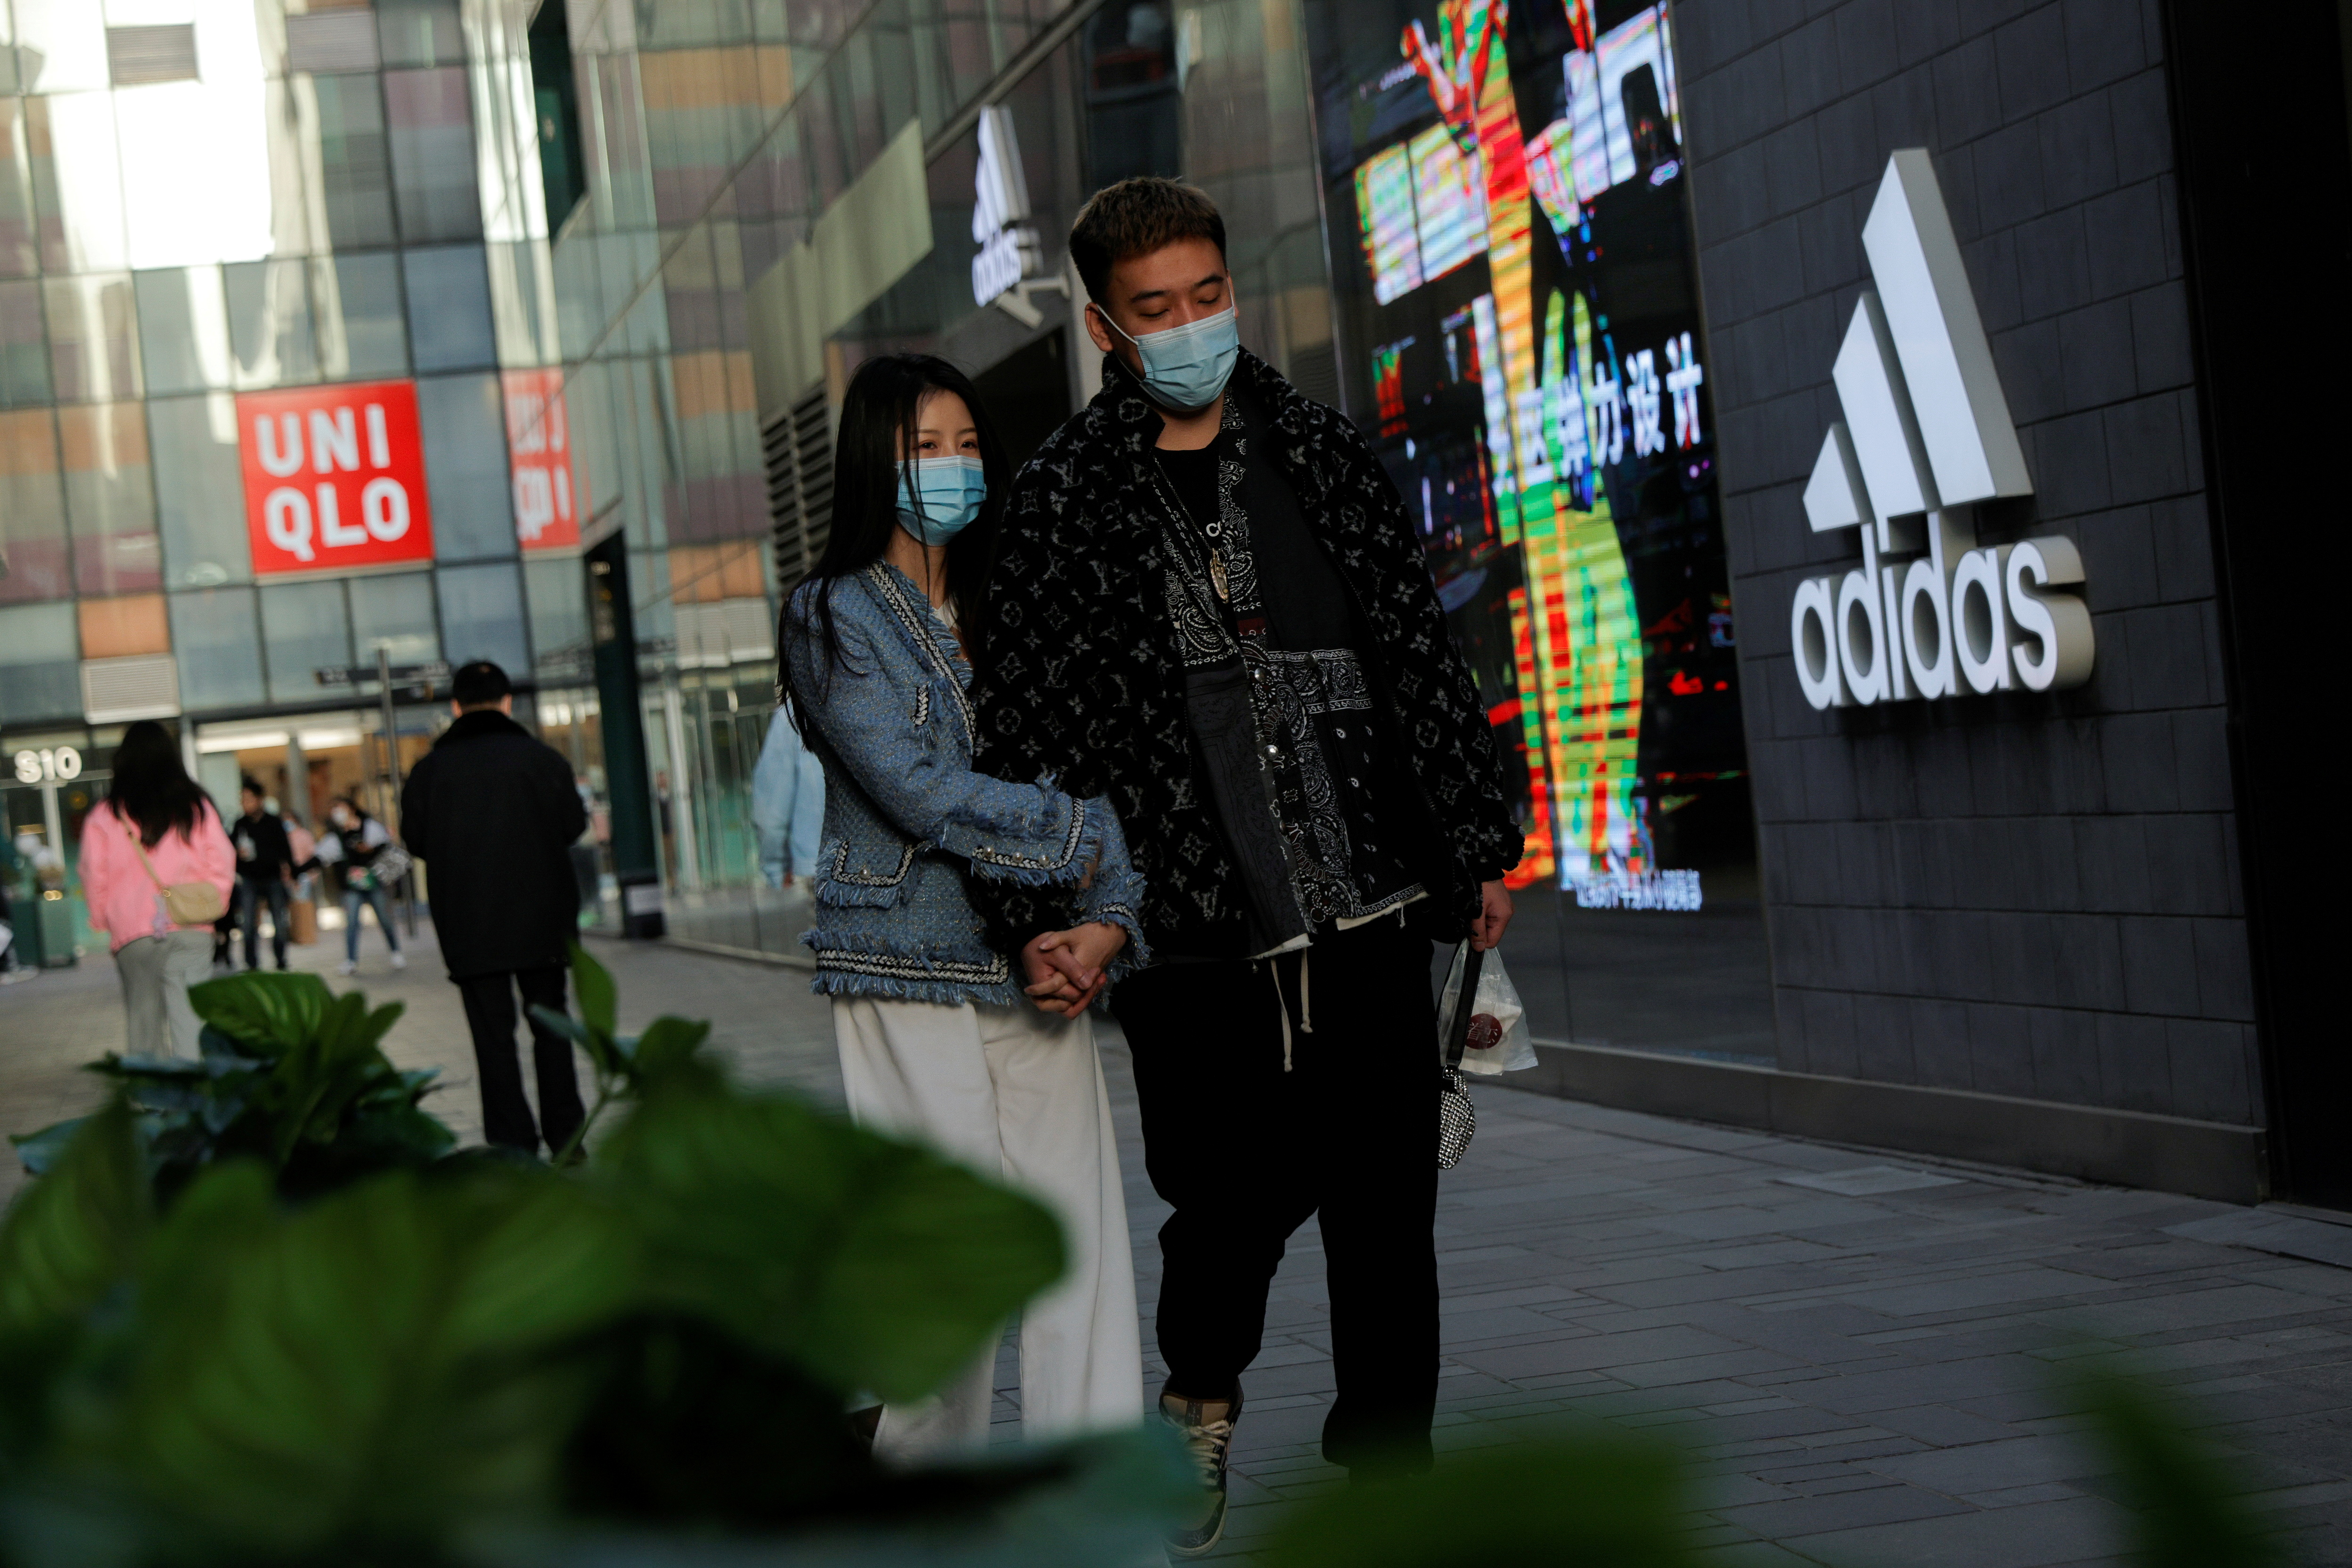 People walk past an Adidas store in a shopping area in Beijing, China, March 28, 2021. REUTERS/Thomas Peter/File Photo